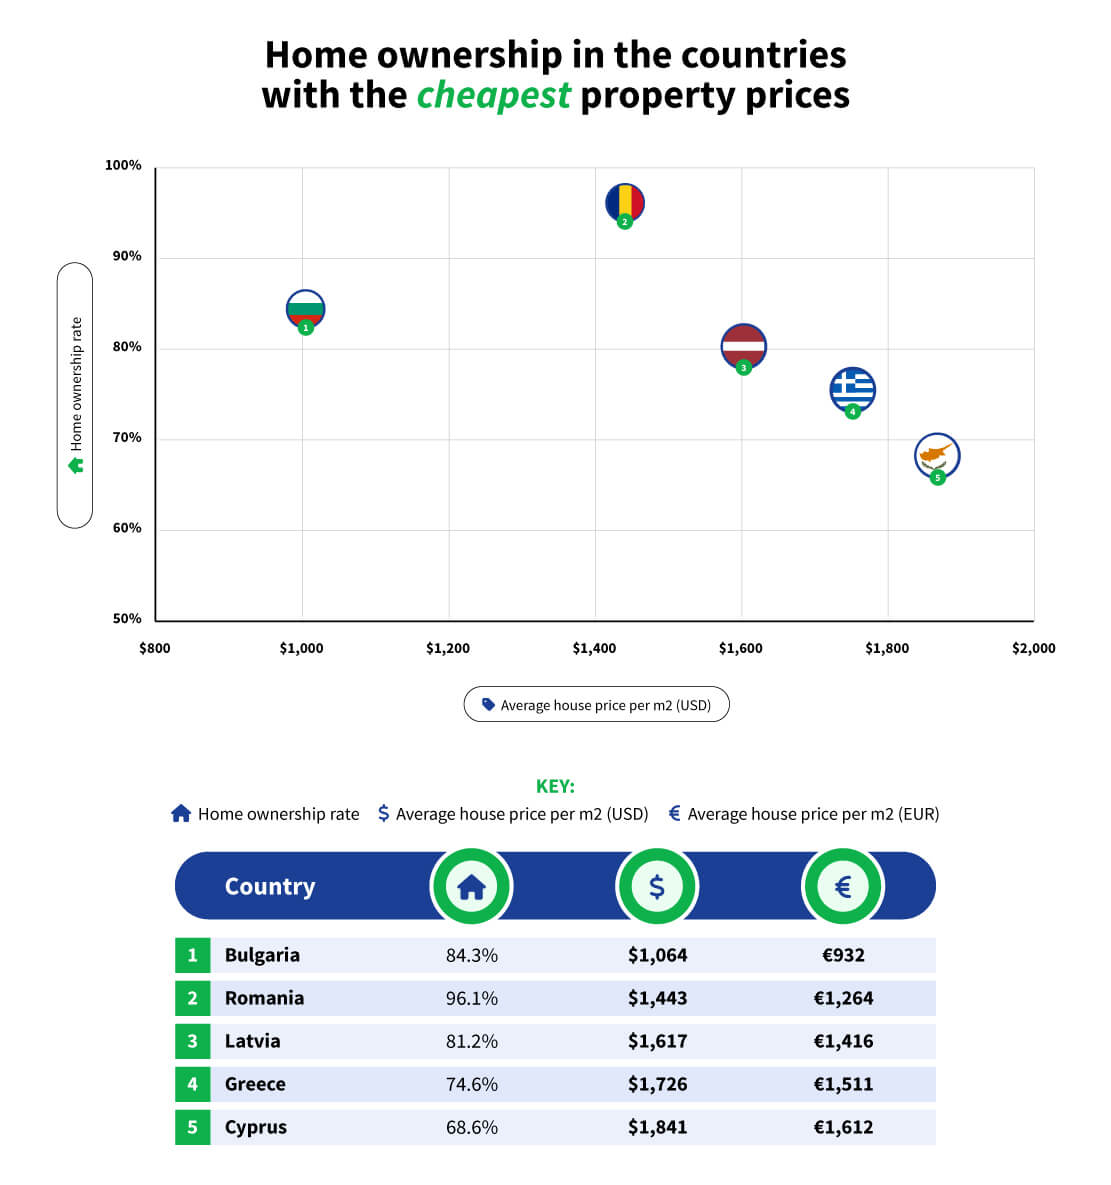 Home ownership in the countries with the cheapest property prices